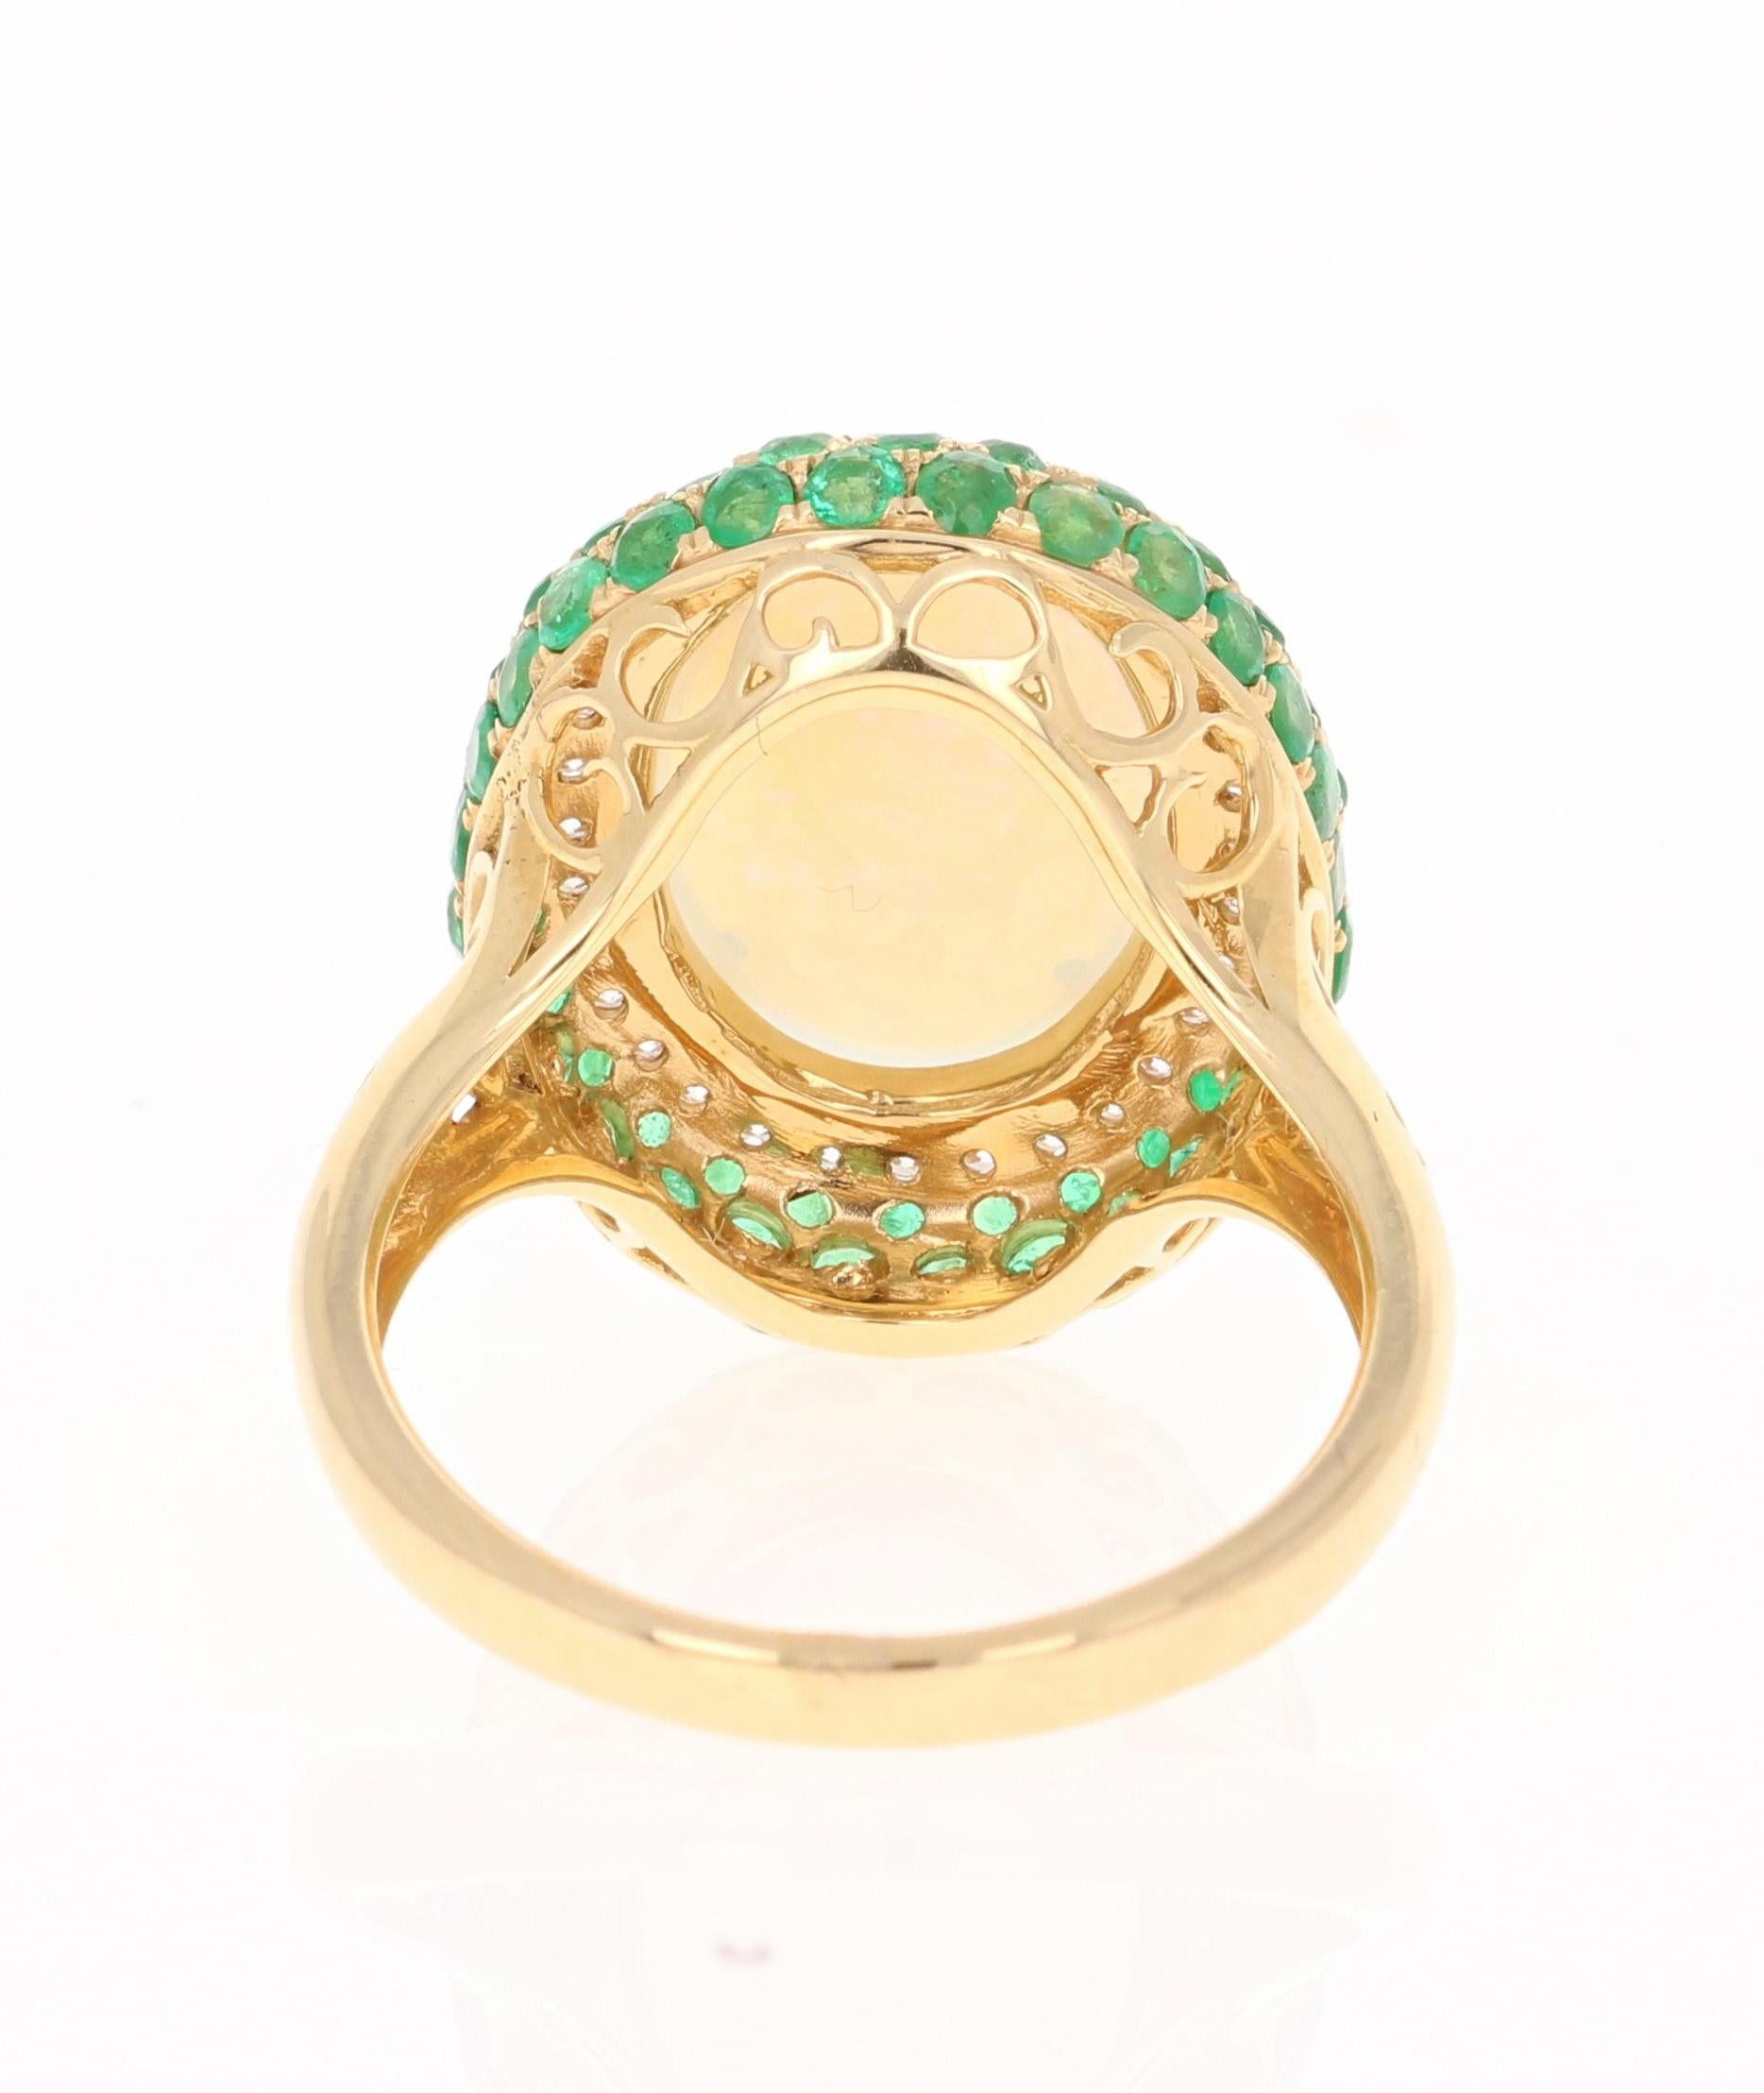 Oval Cut 4.82 Carat Opal, Emerald and Diamond 18 Karat Yellow Gold Ring For Sale